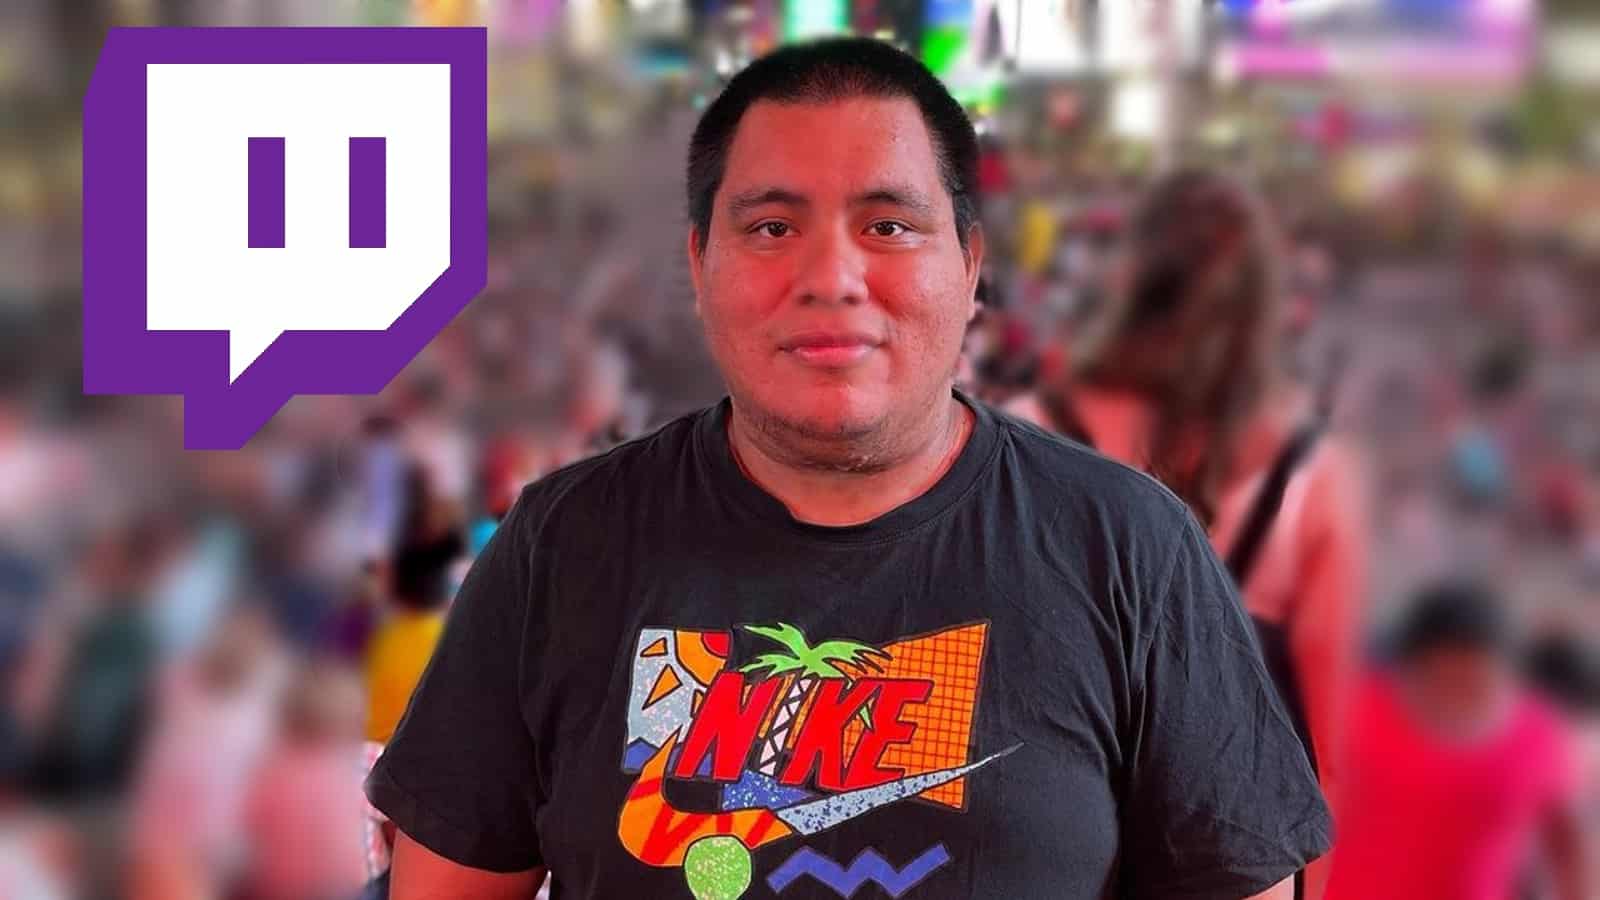 Mexican Andy Twitch logo